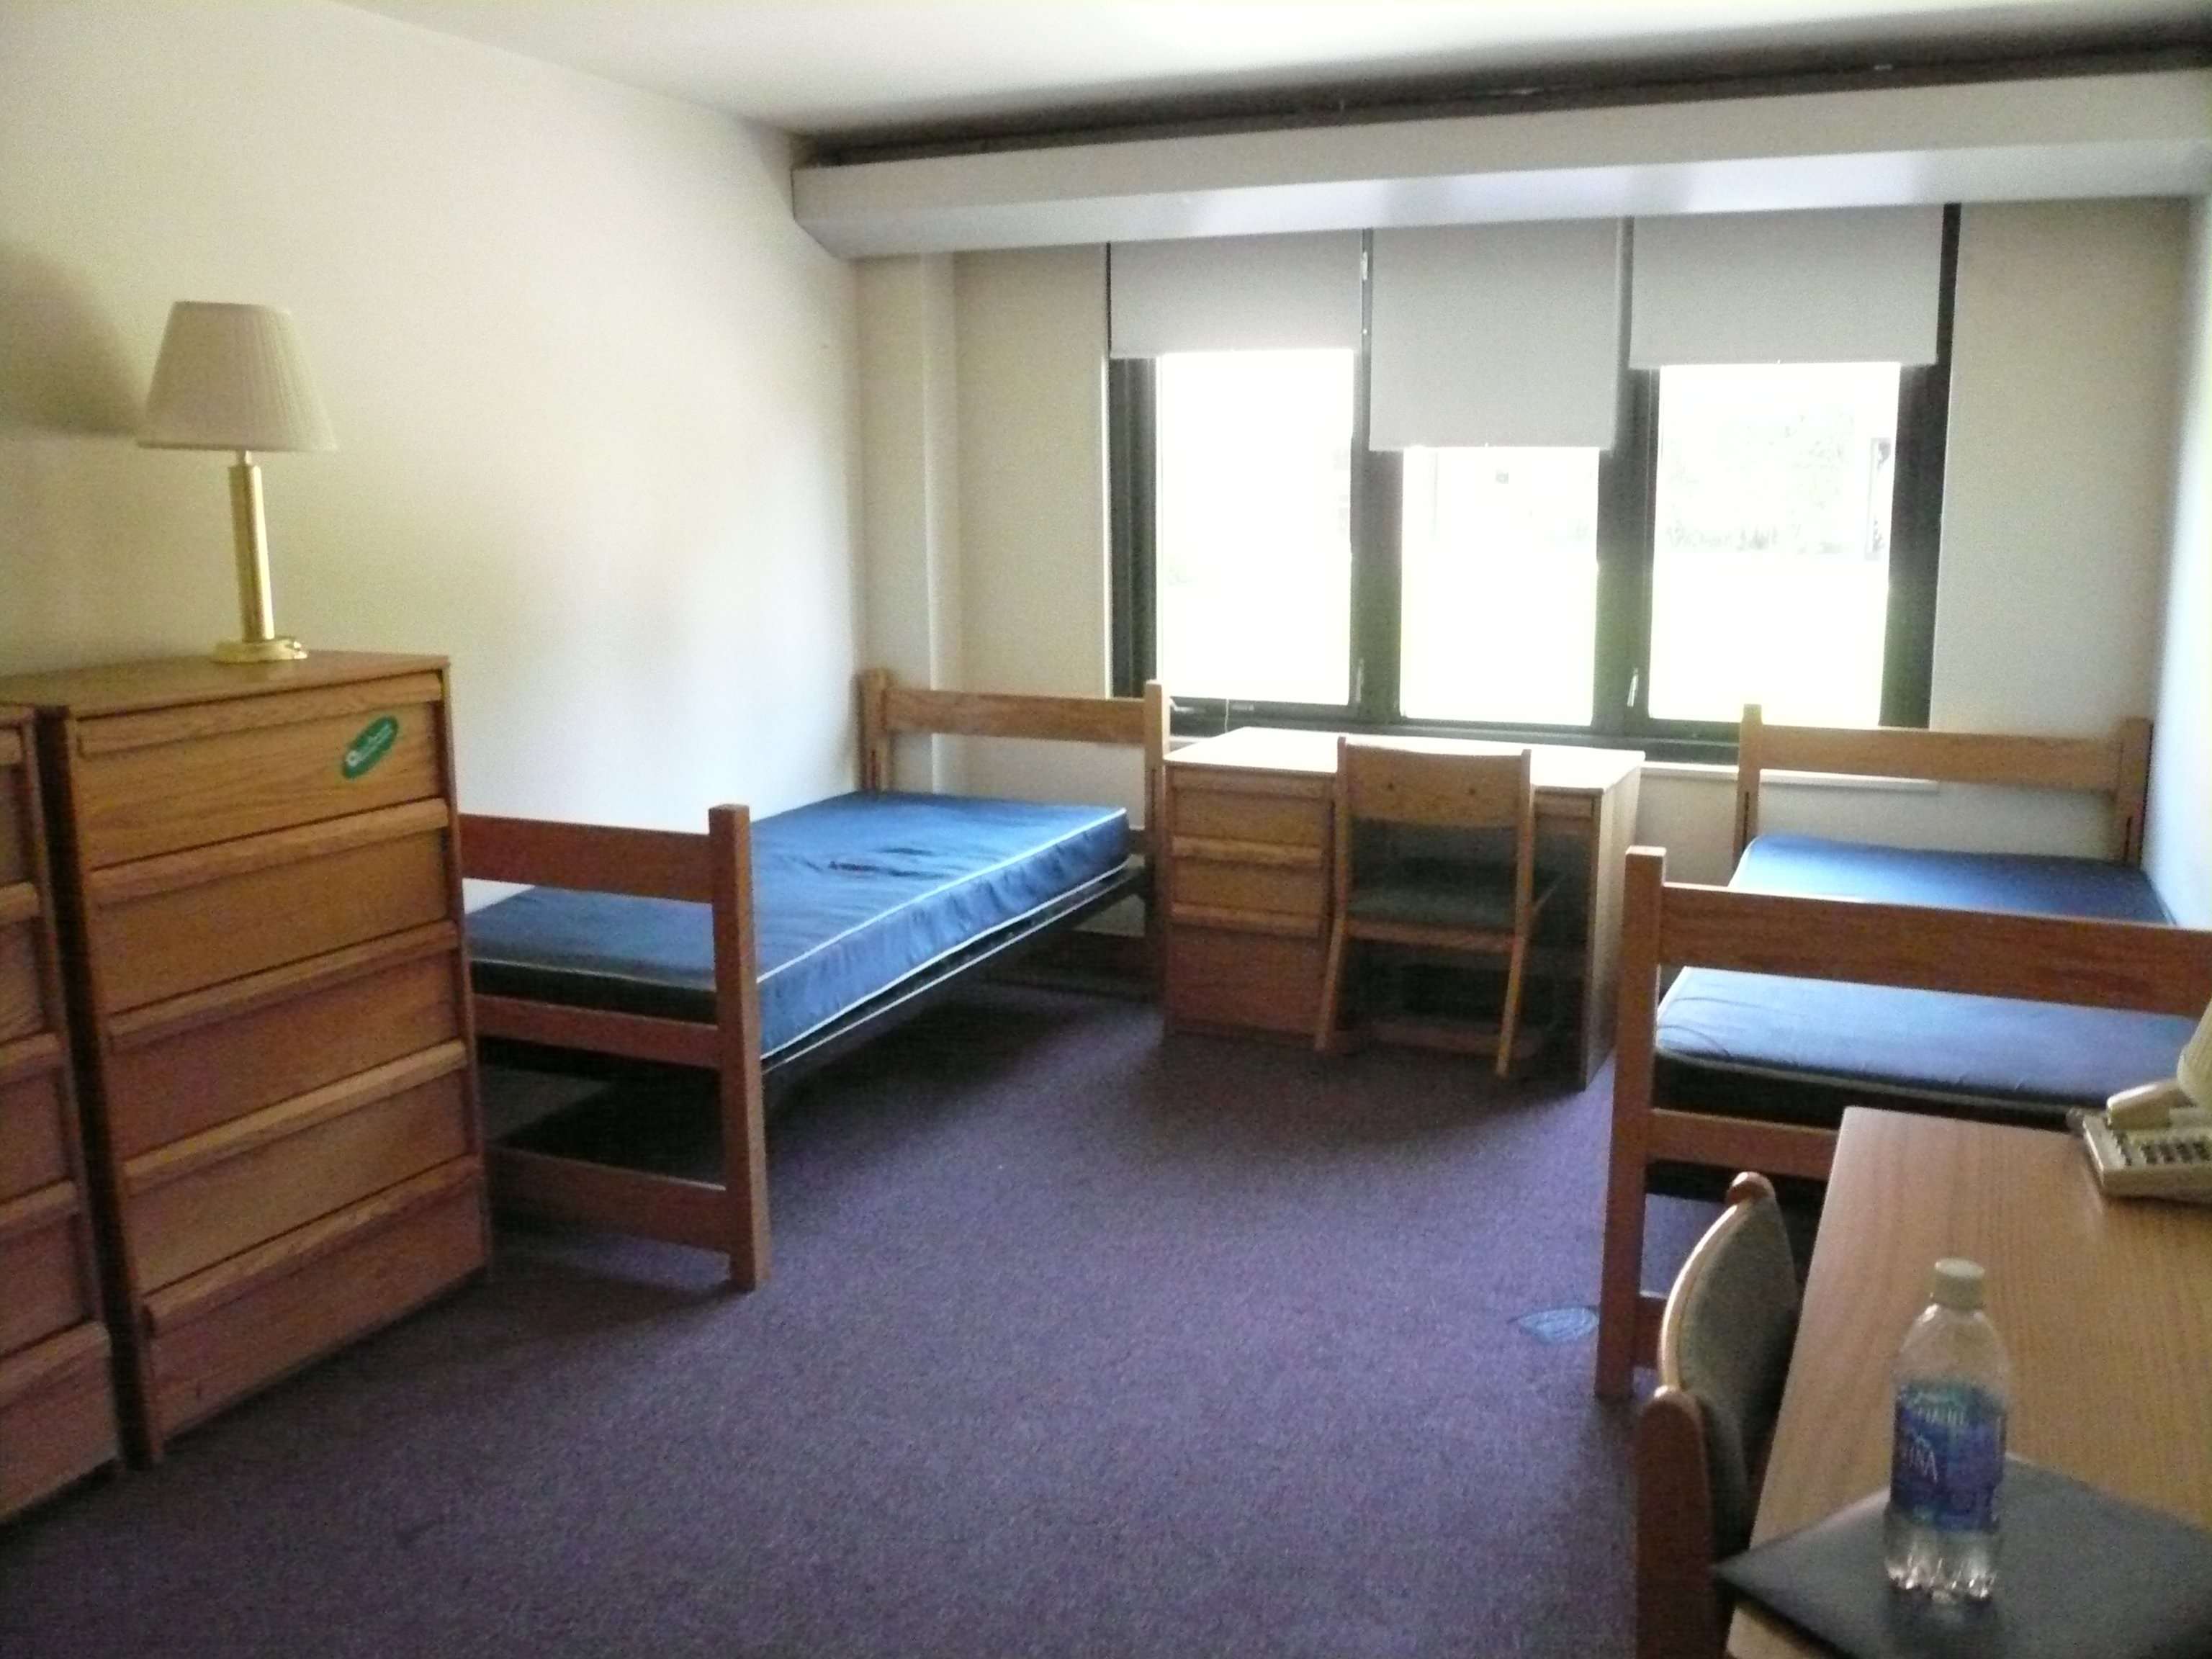 image for Record Levels of Toxic Flame Retardants Found in College Dorms